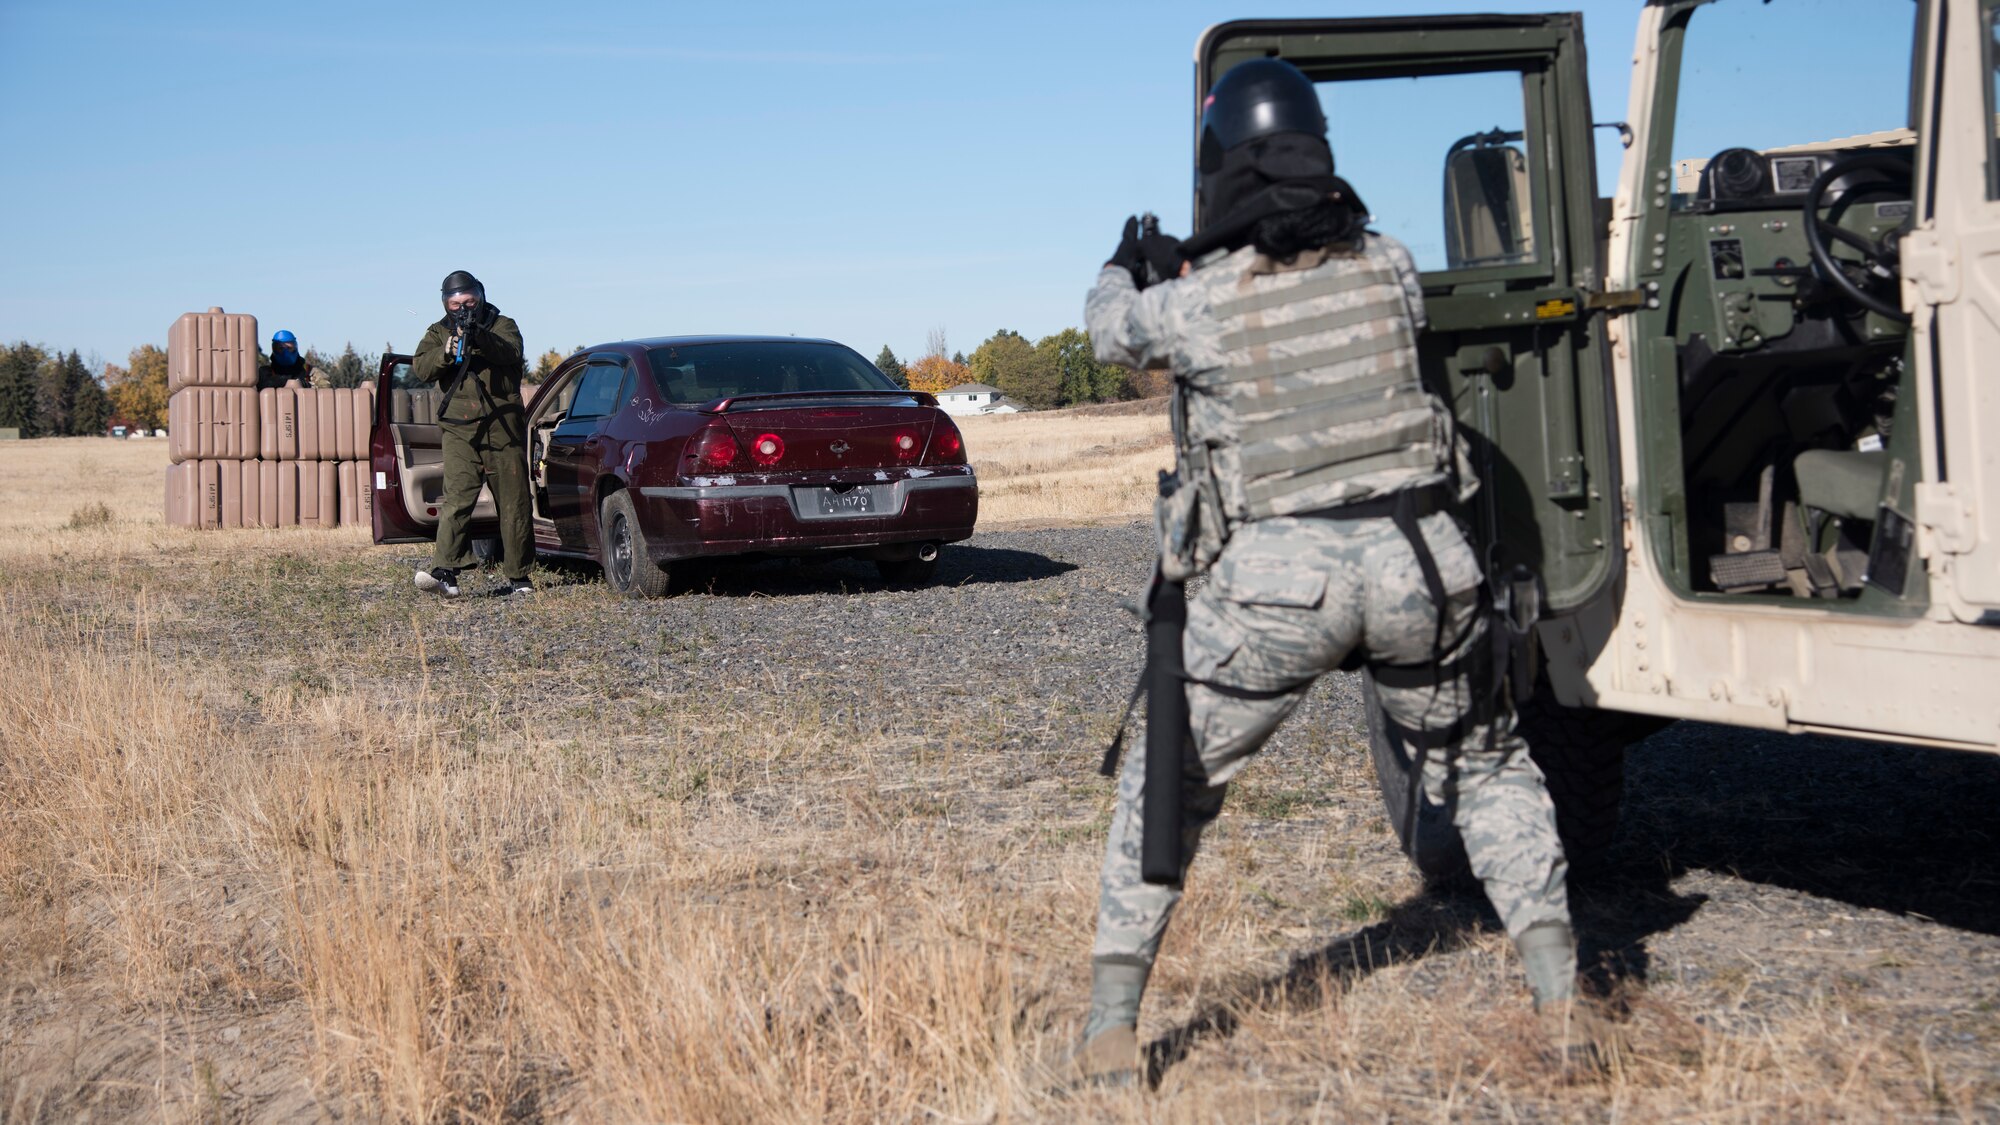 Airman 1st Class Tonya Brackens, 92nd Security Forces Squadron installation entry controller, simulates returning fire to an aggressive role-player during a high-risk situation training exercise at Fairchild Air Force Base, Washington, Oct. 15, 2018. Trainees practiced entry controller, traffic stops and domestic situations during which they didn’t know what they might encounter. Training how to approach an unknown situation is a vital skill Defenders have to learn to remain as safe as possible. (U.S. Air Force photo/ Senior Airman Ryan Lackey)